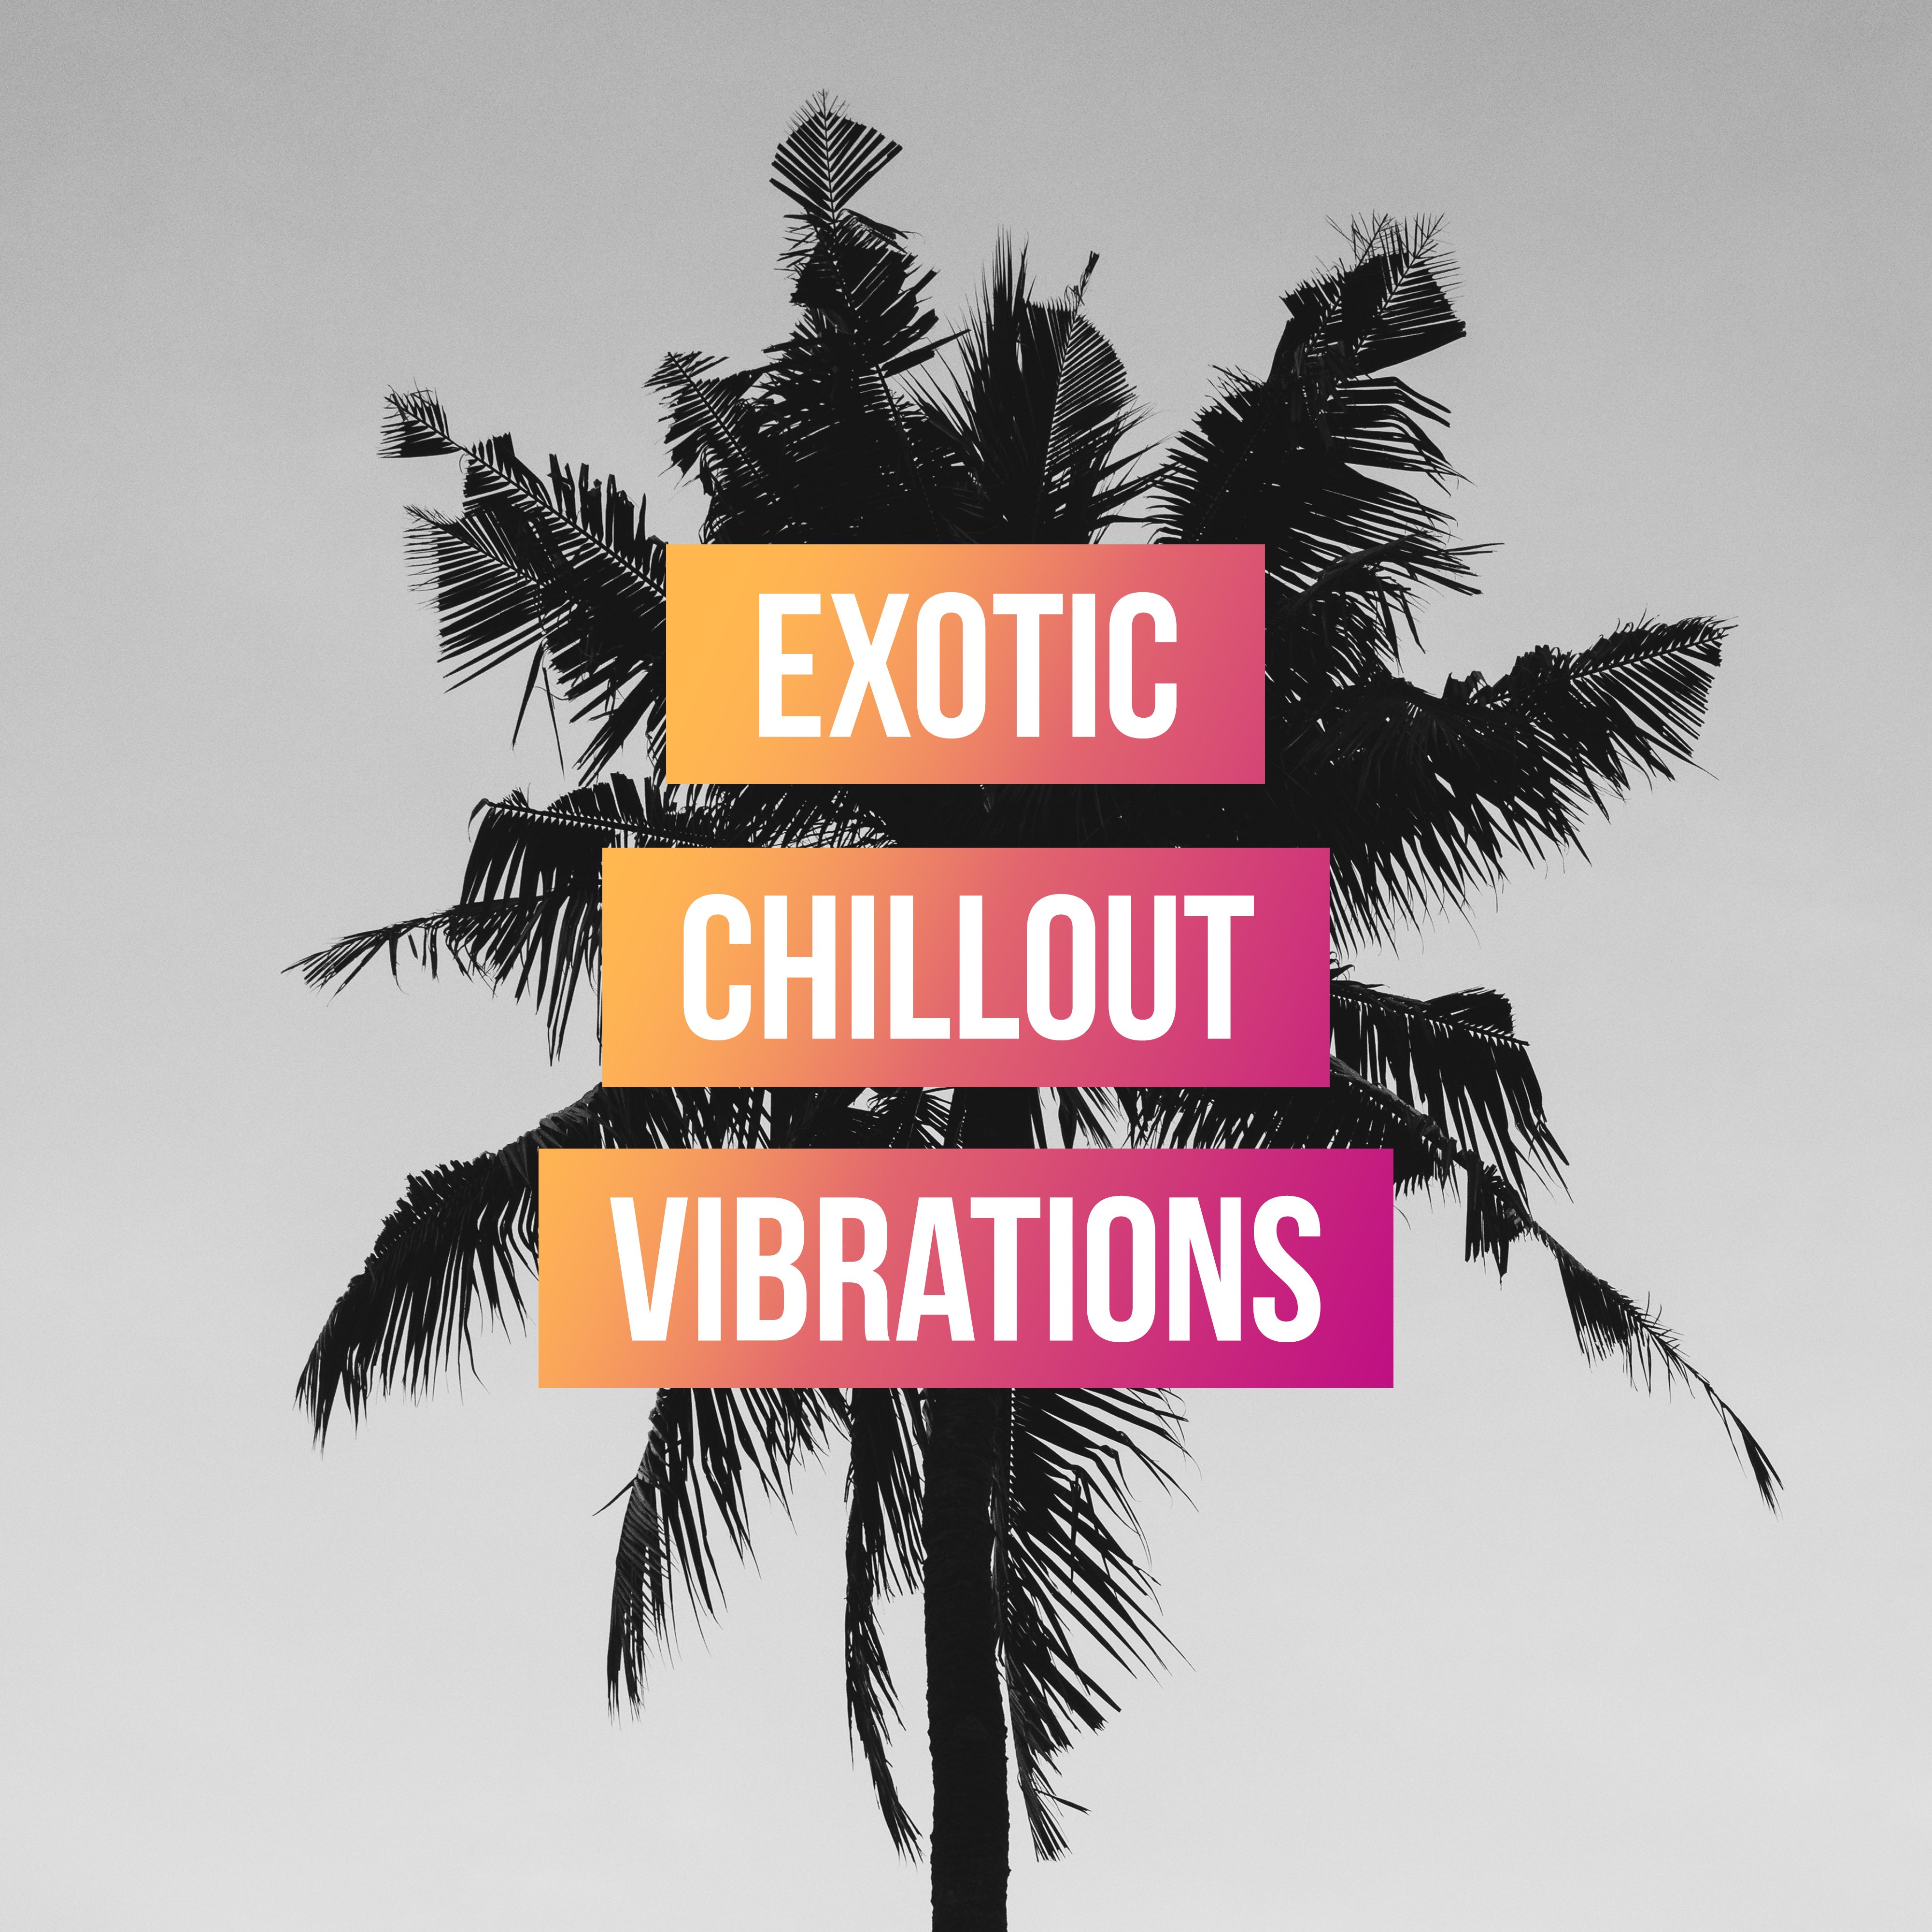 Exotic Chillout Vibrations